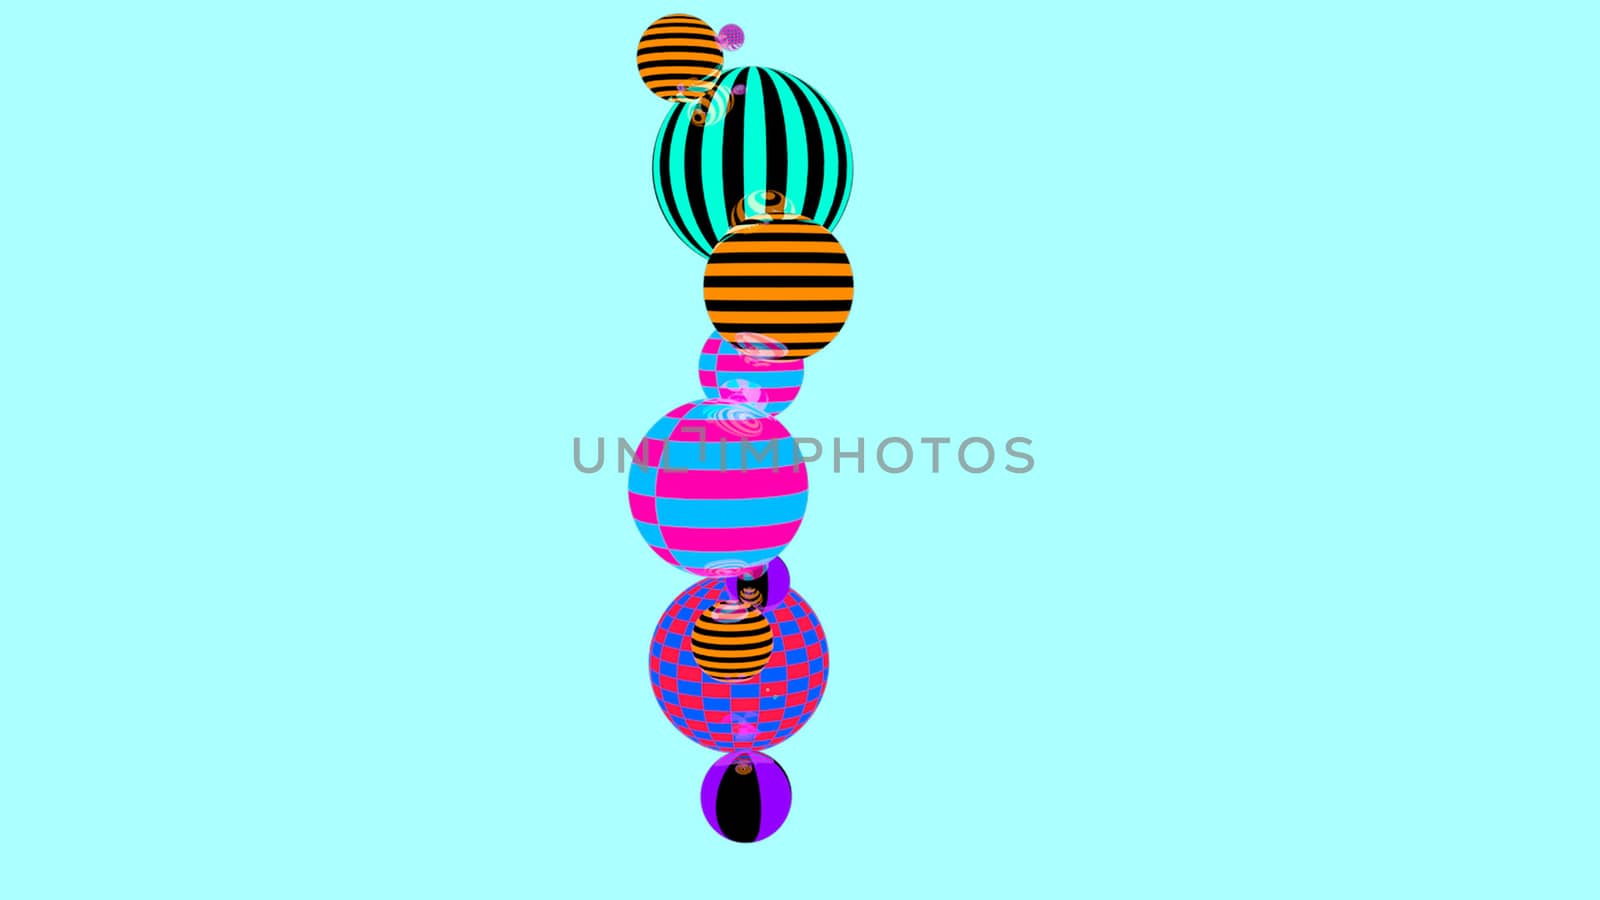 Abstract background with multicolored decorative balls. 3d rendering